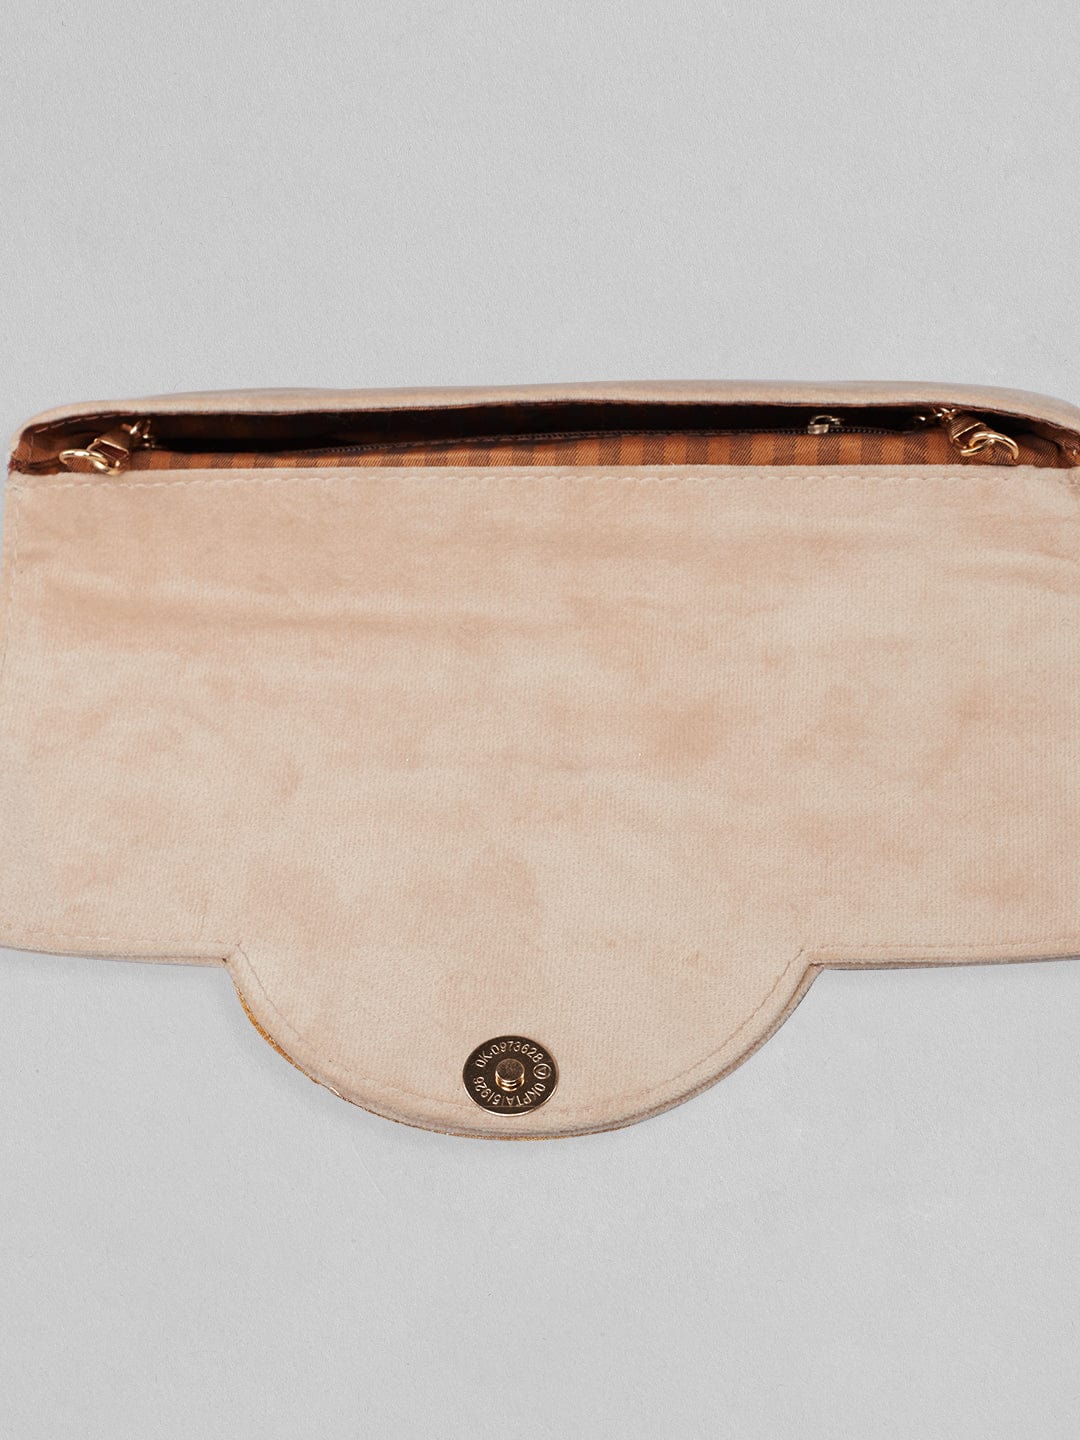 Rubans Beige Colour Clutch Bag With Design Of Studded Stones And Pearls. Handbag & Wallet Accessories